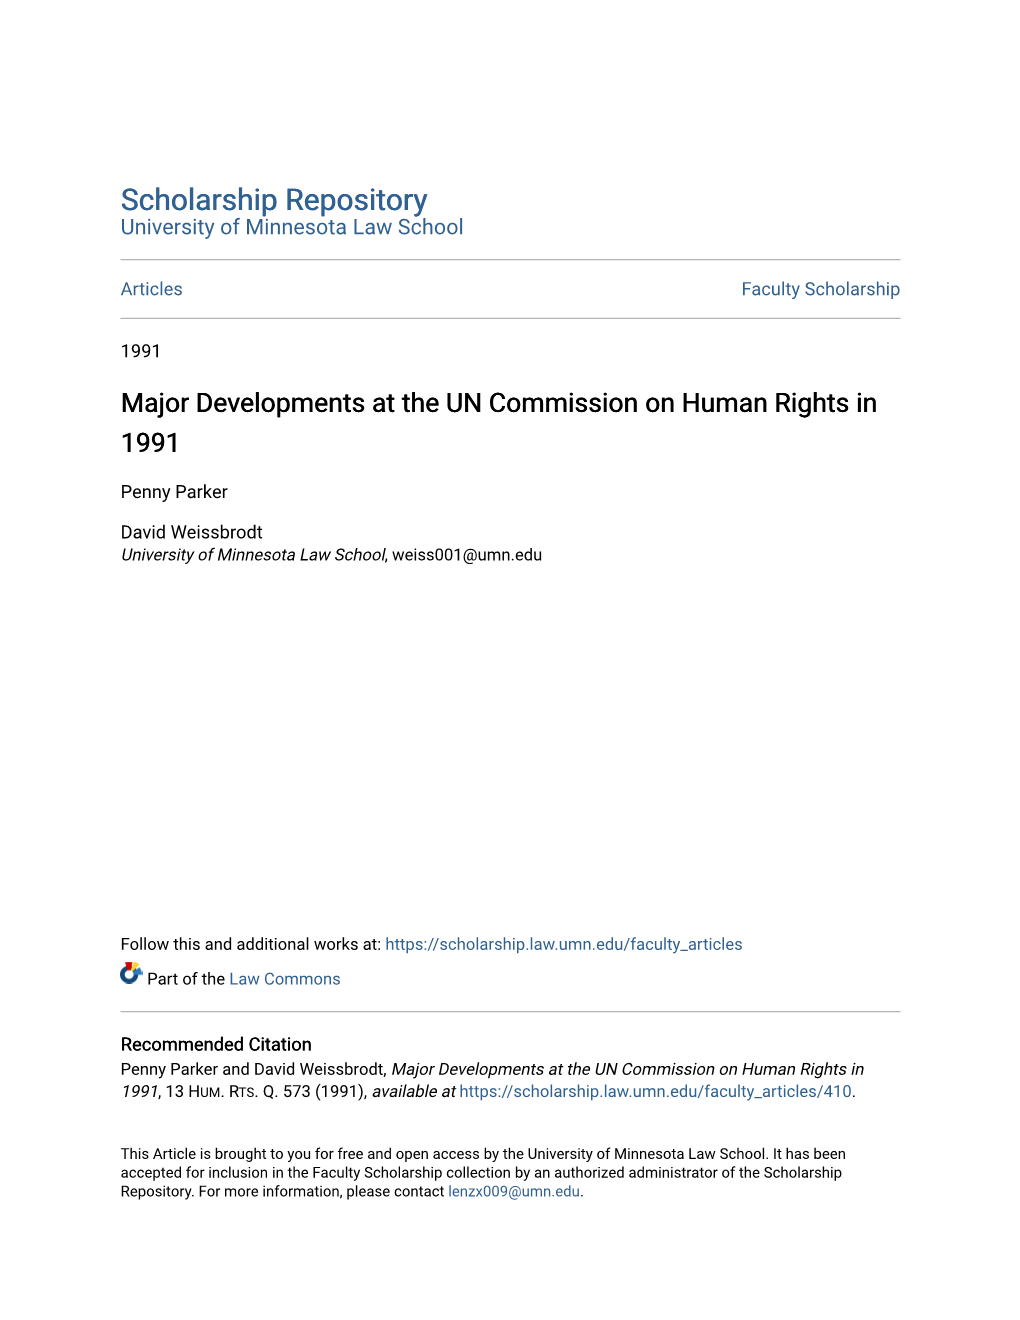 Major Developments at the UN Commission on Human Rights in 1991